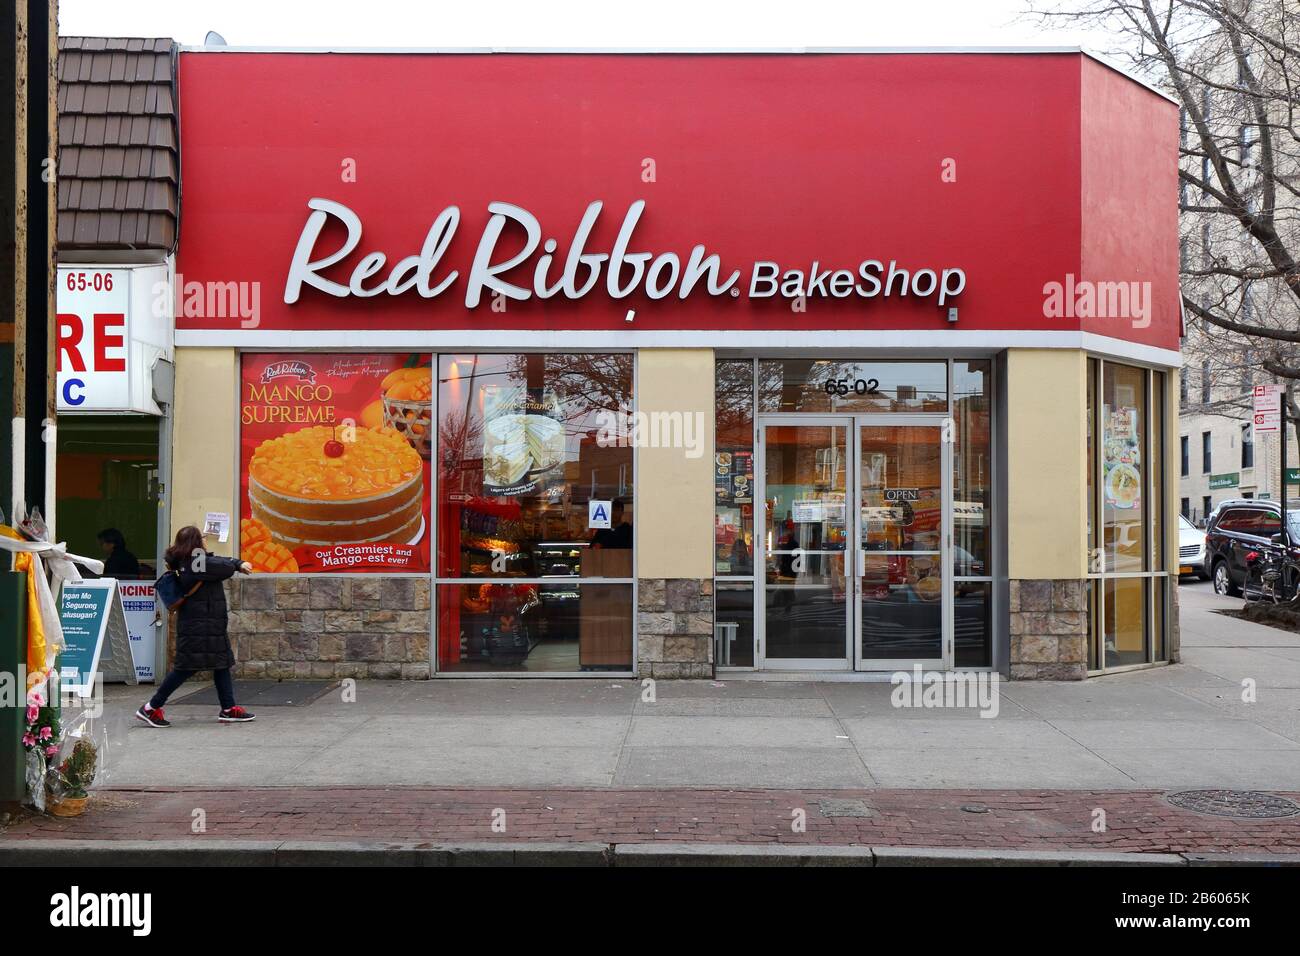 Red Ribbon Bakeshop, 65-02 Roosevelt Ave, Queens, New York. NYC storefront photo of a Filipino chain bakery in the Woodside neighborhood. Stock Photo